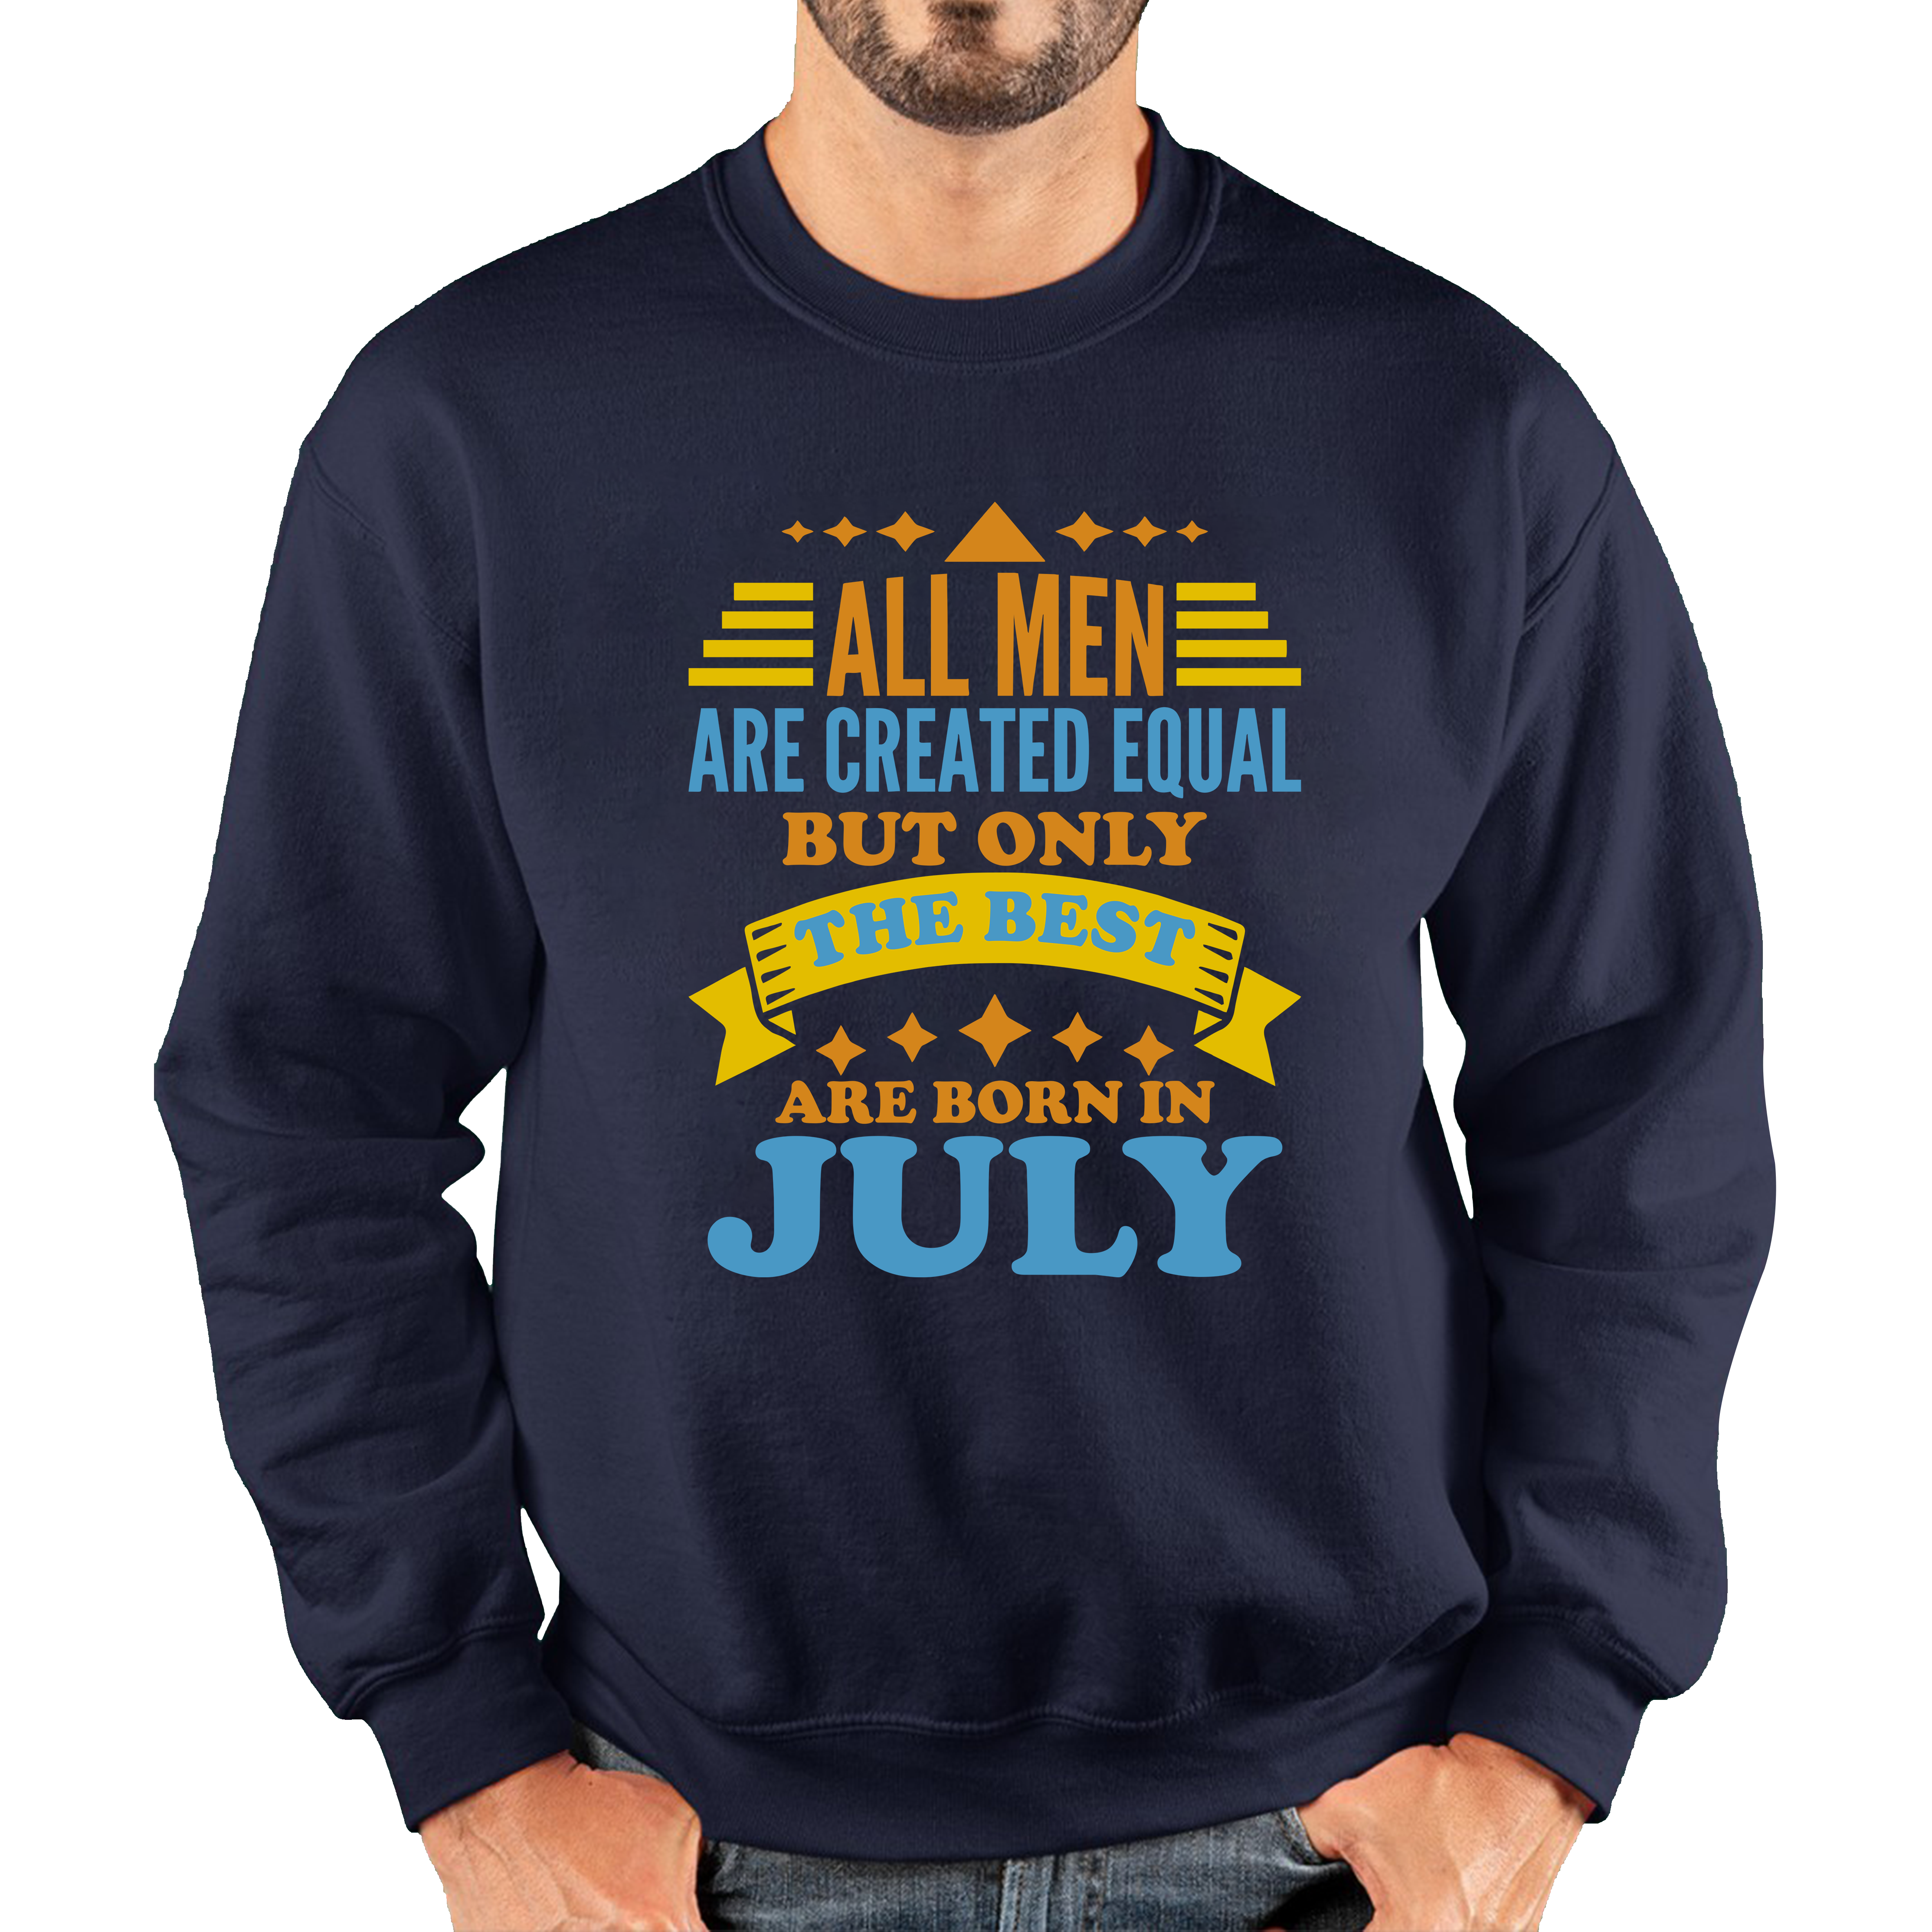 All Men Are Created Equal But Only The Best Are Born In July Funny Birthday Quote Unisex Sweatshirt